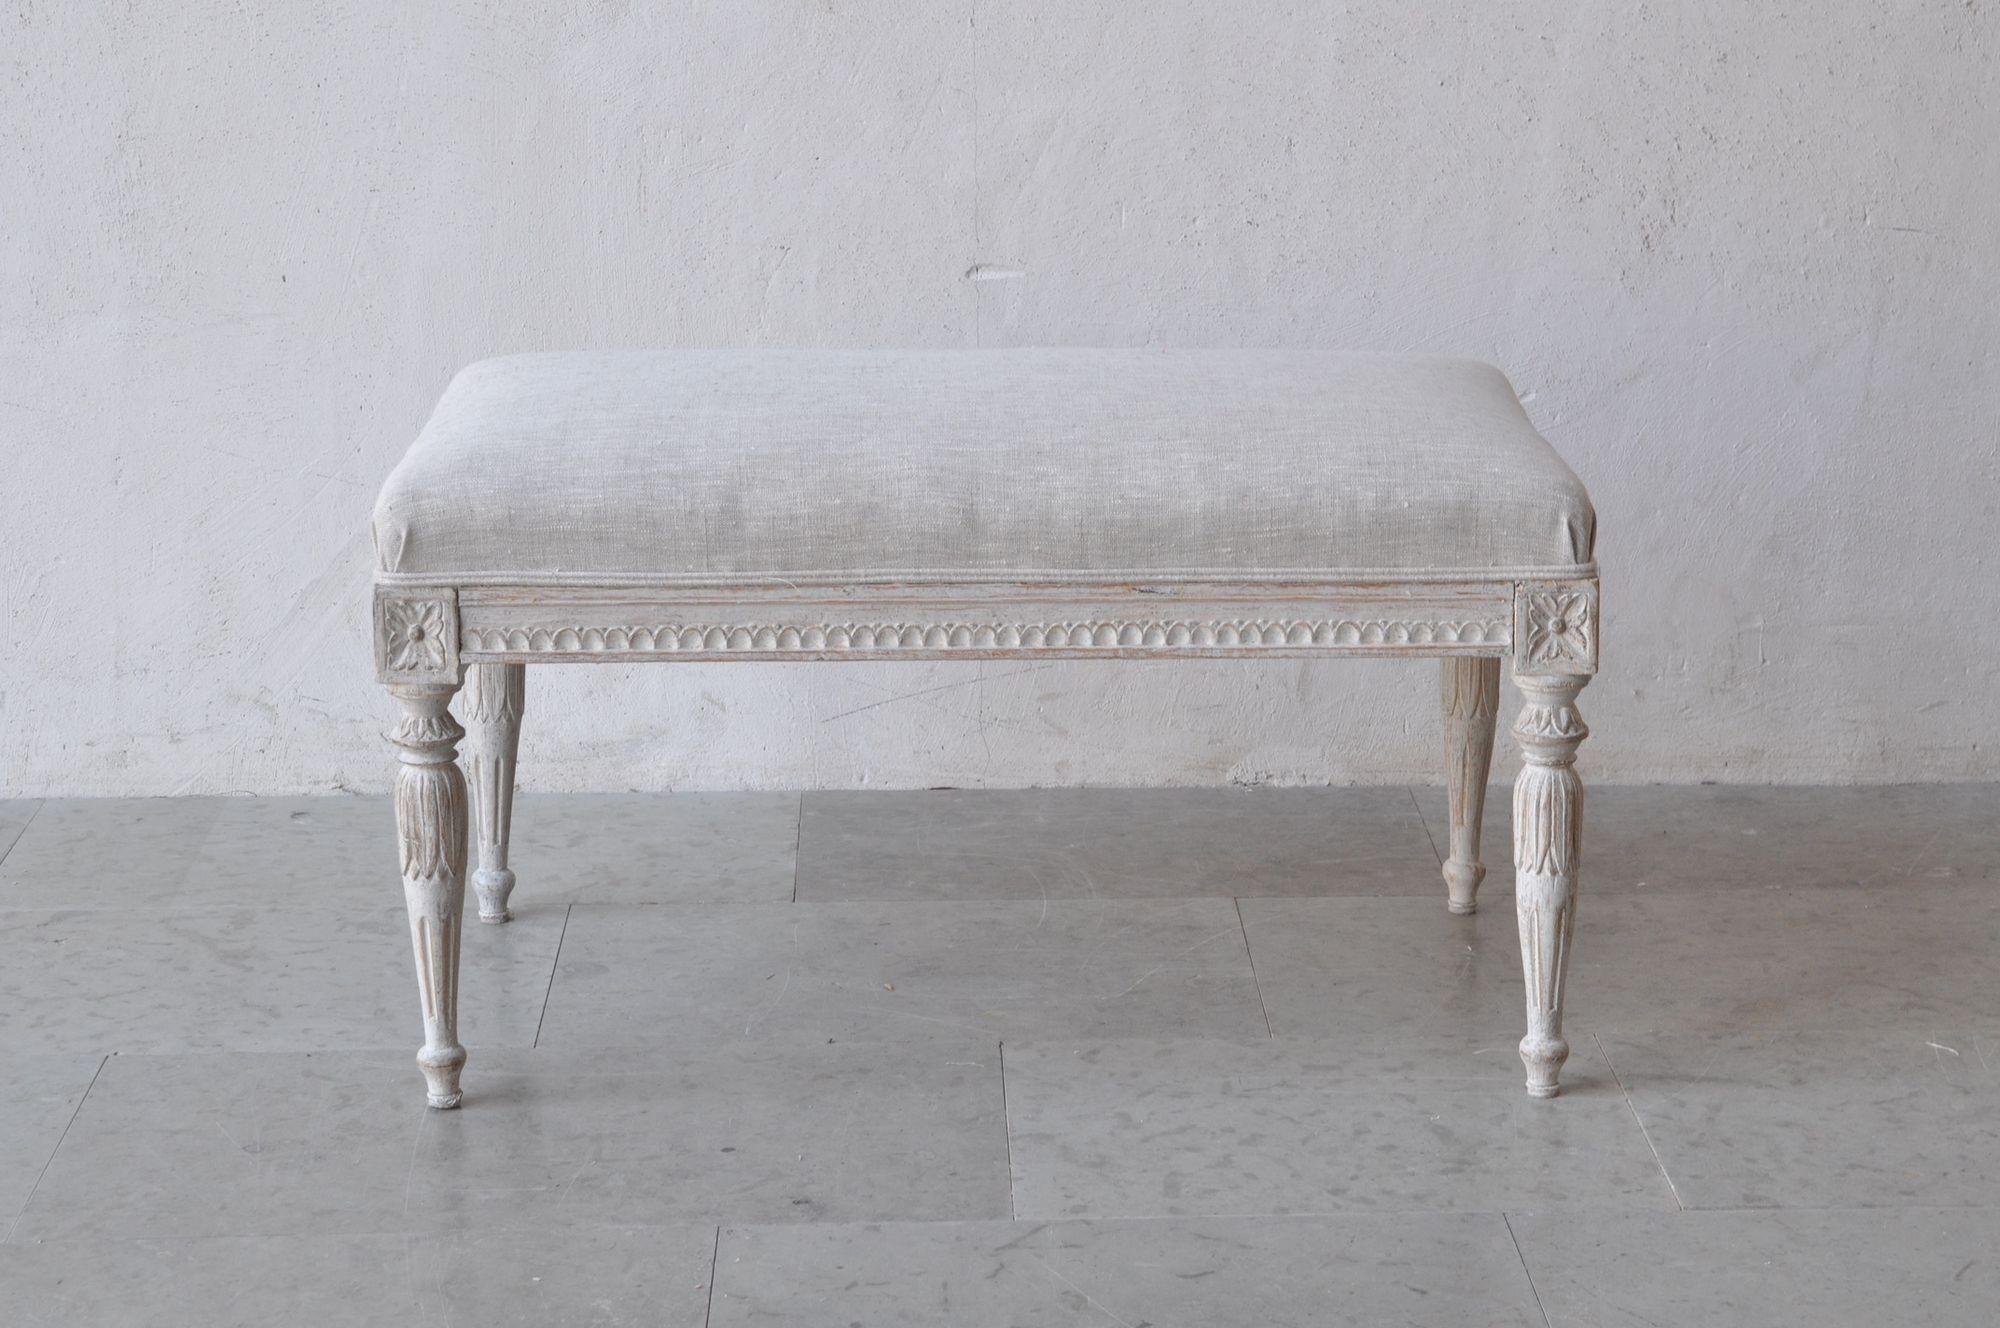 This is a richly carved 18th Century Swedish Gustavian period painted bench, newly upholstered in linen. There is carved egg and dart detail on the seat frame and carved rosettes above round, tapered and fluted legs adorned with acanthus leaves.